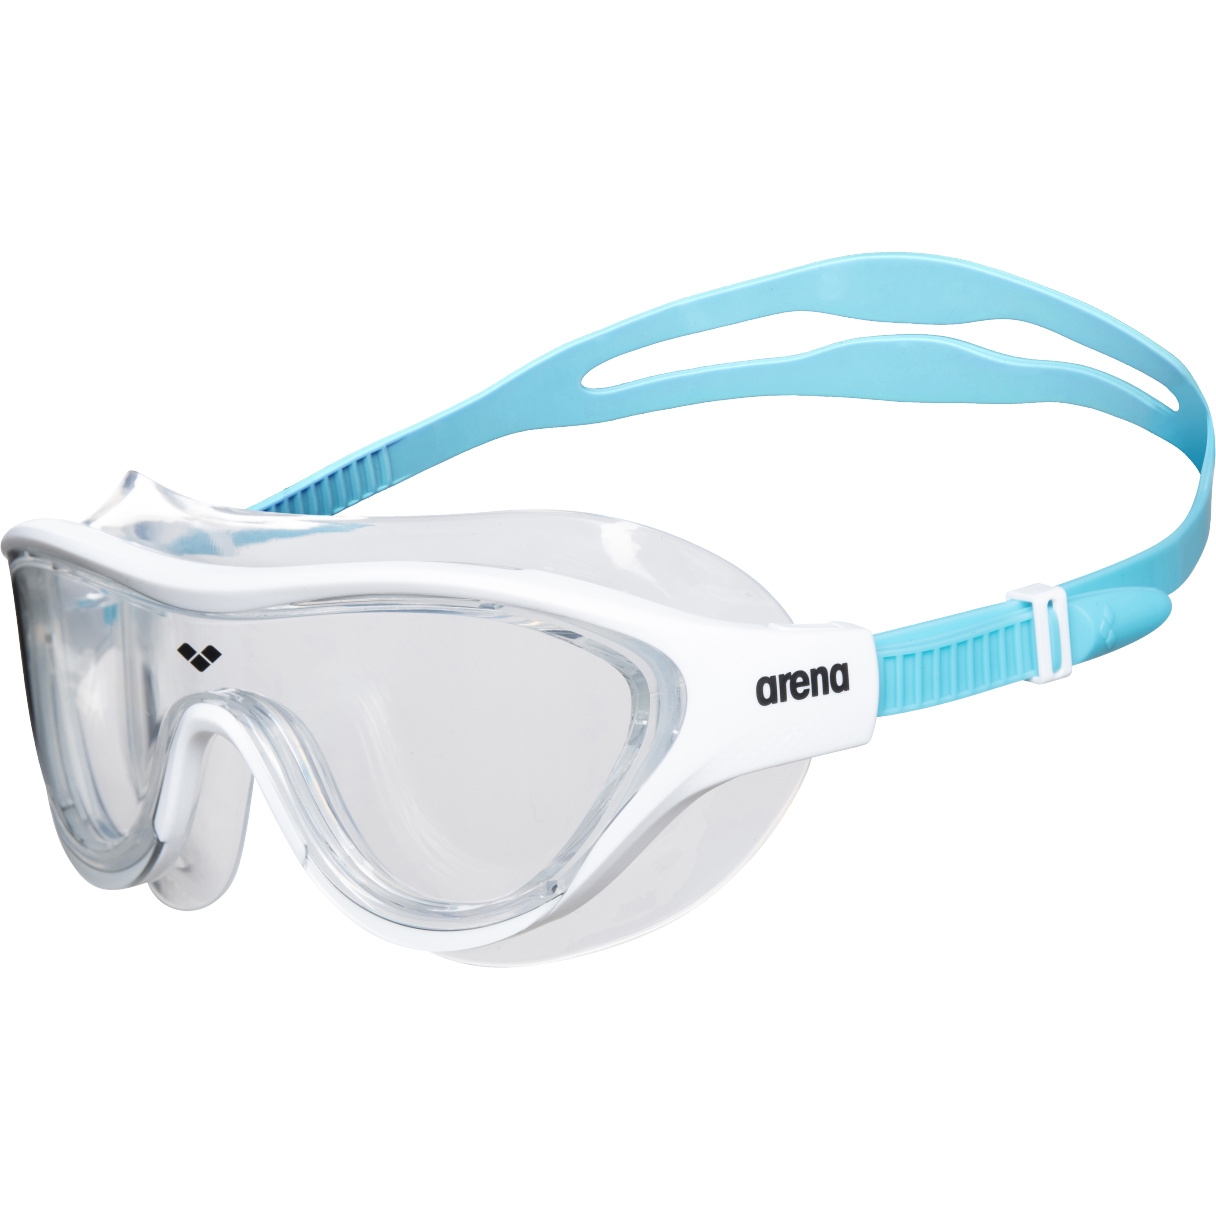 Image of arena The One Mask JR Junior Swimming Goggles - Clear-White-Lightblue